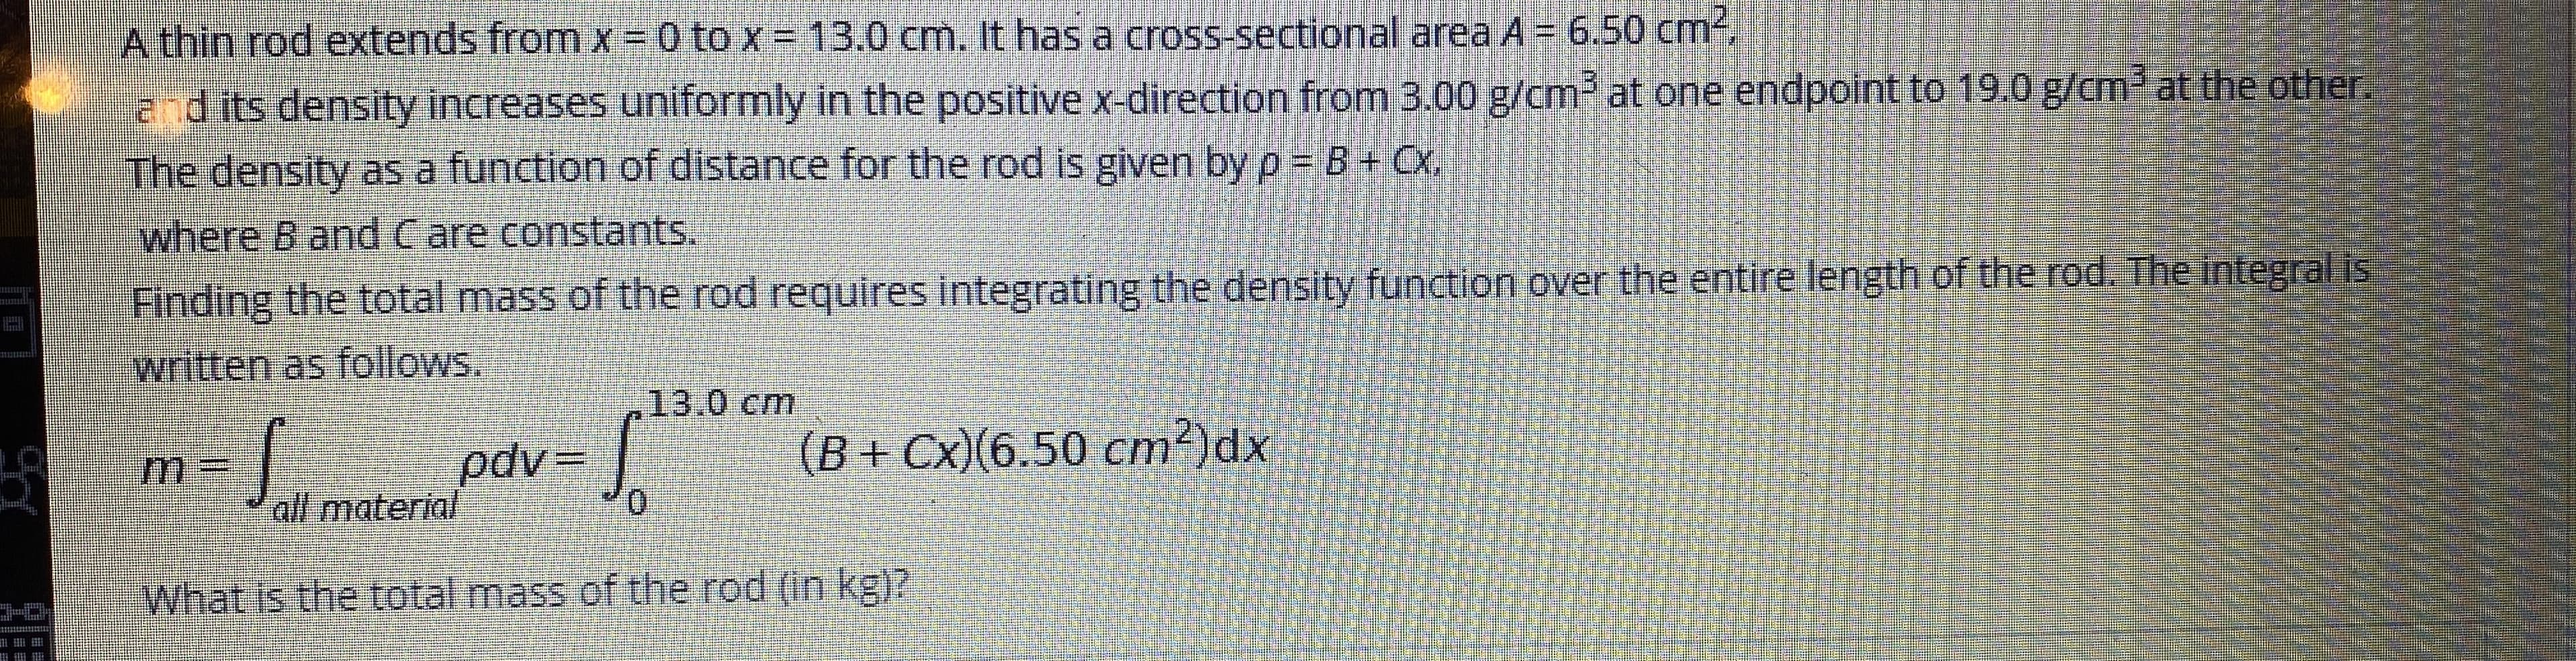 A thin rod extends from x =D 0 to x = 13.0 cm. It has a cross-sectional area A = 6.50 cm-.
adits density increases uniformly in the positive x-direction from 3.00 g/cm2 at one endpoint to 19.0 g/cm at the other.
The density as a function of distance for the rod is given by p B+ Cx,
